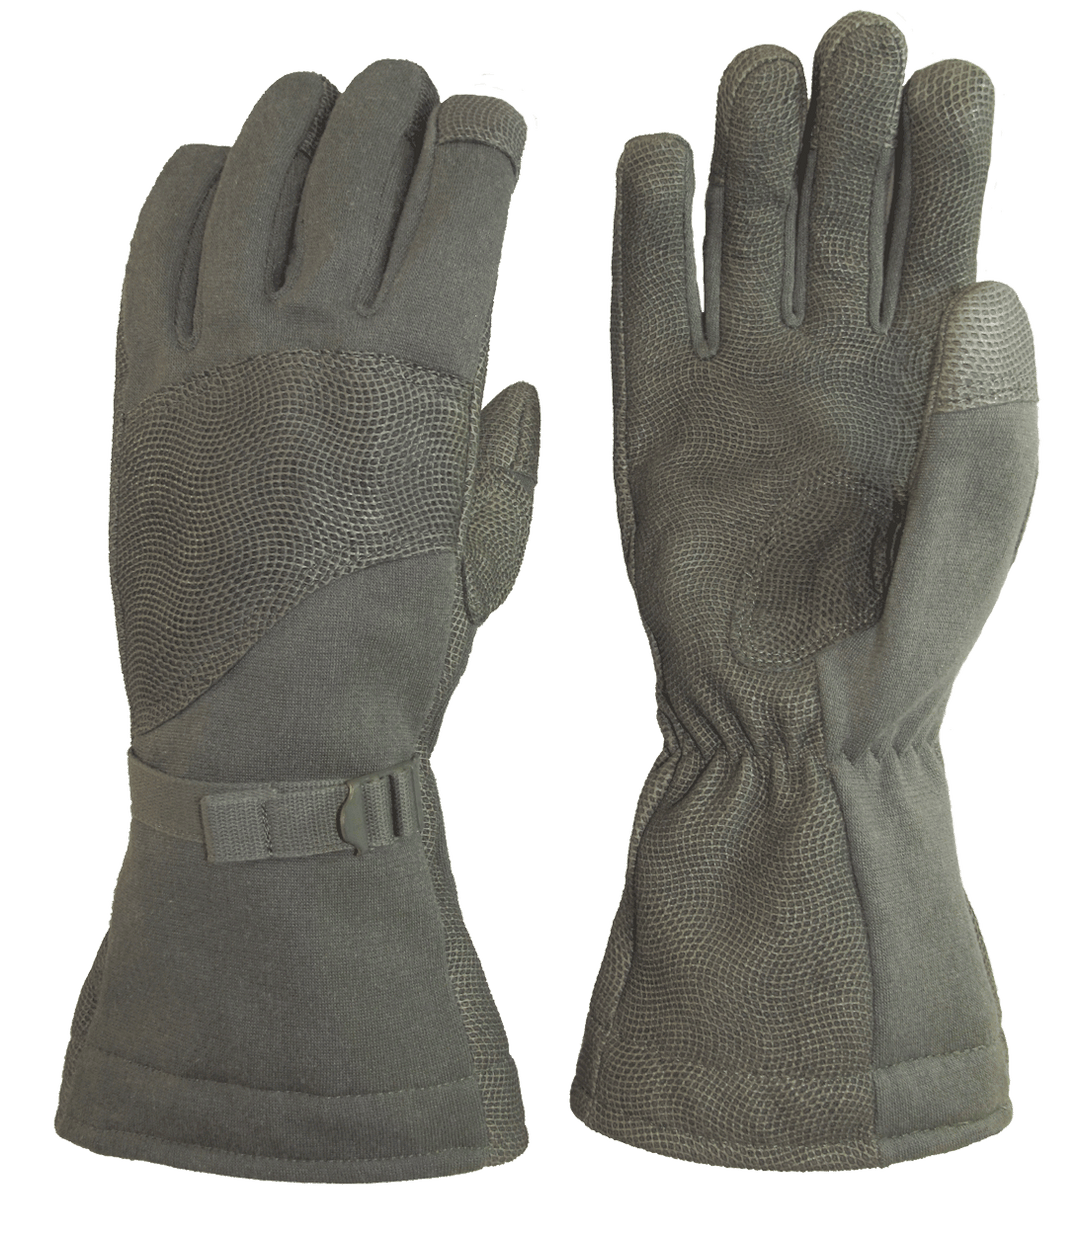 Apparel - Hands - Gloves - USGI Army Cold Weather Foliage Green Flyer's Gloves